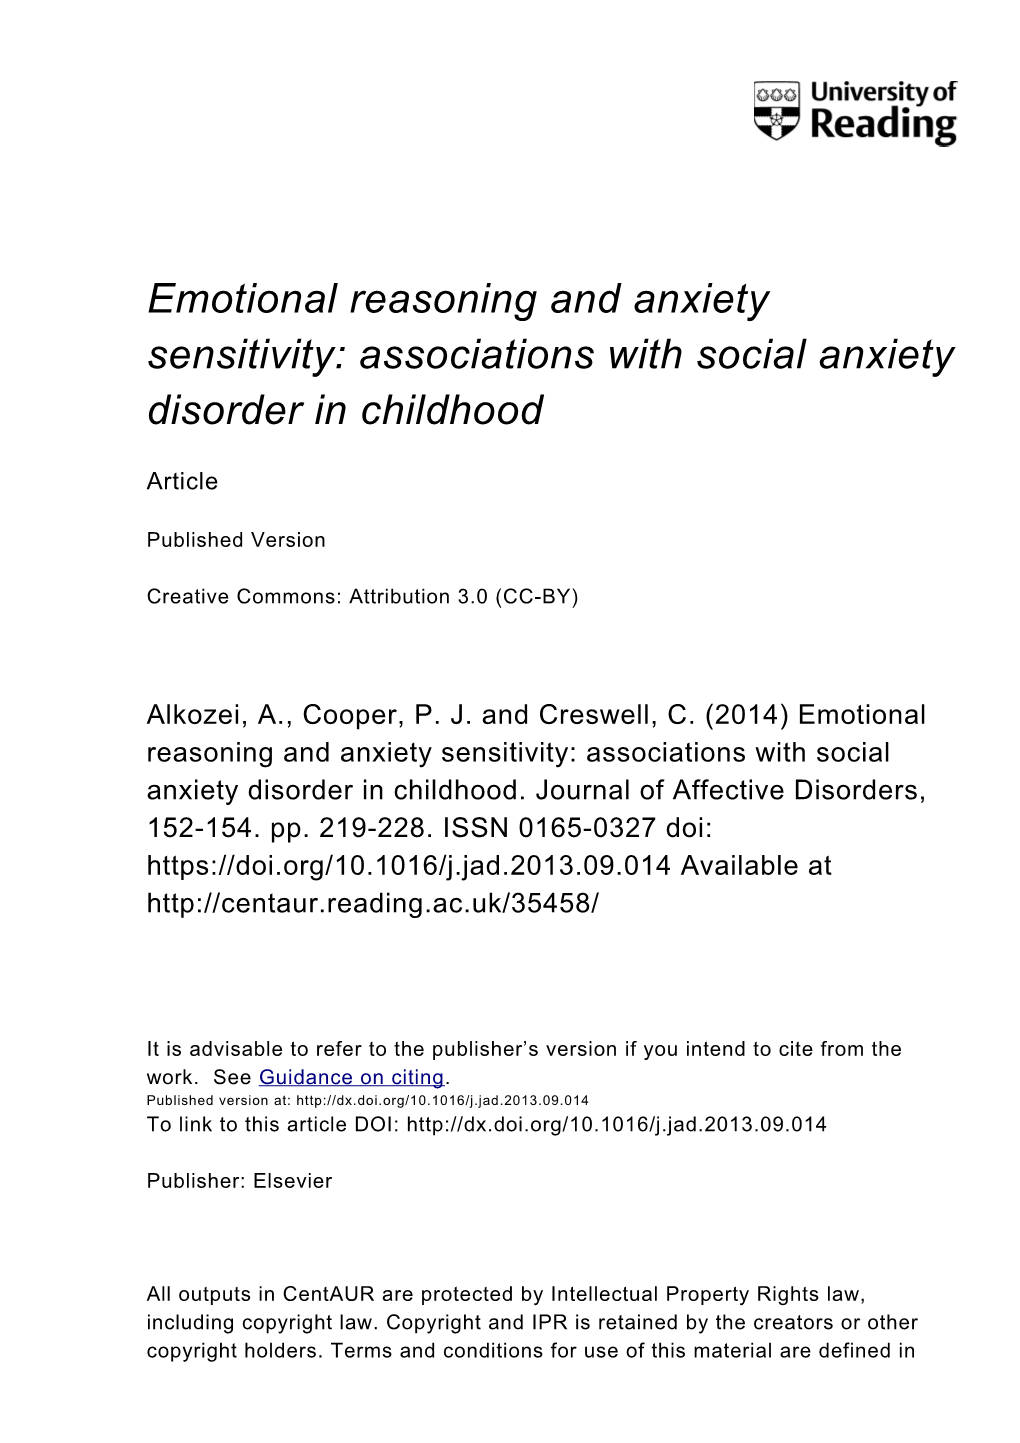 Associations with Social Anxiety Disorder in Childhood